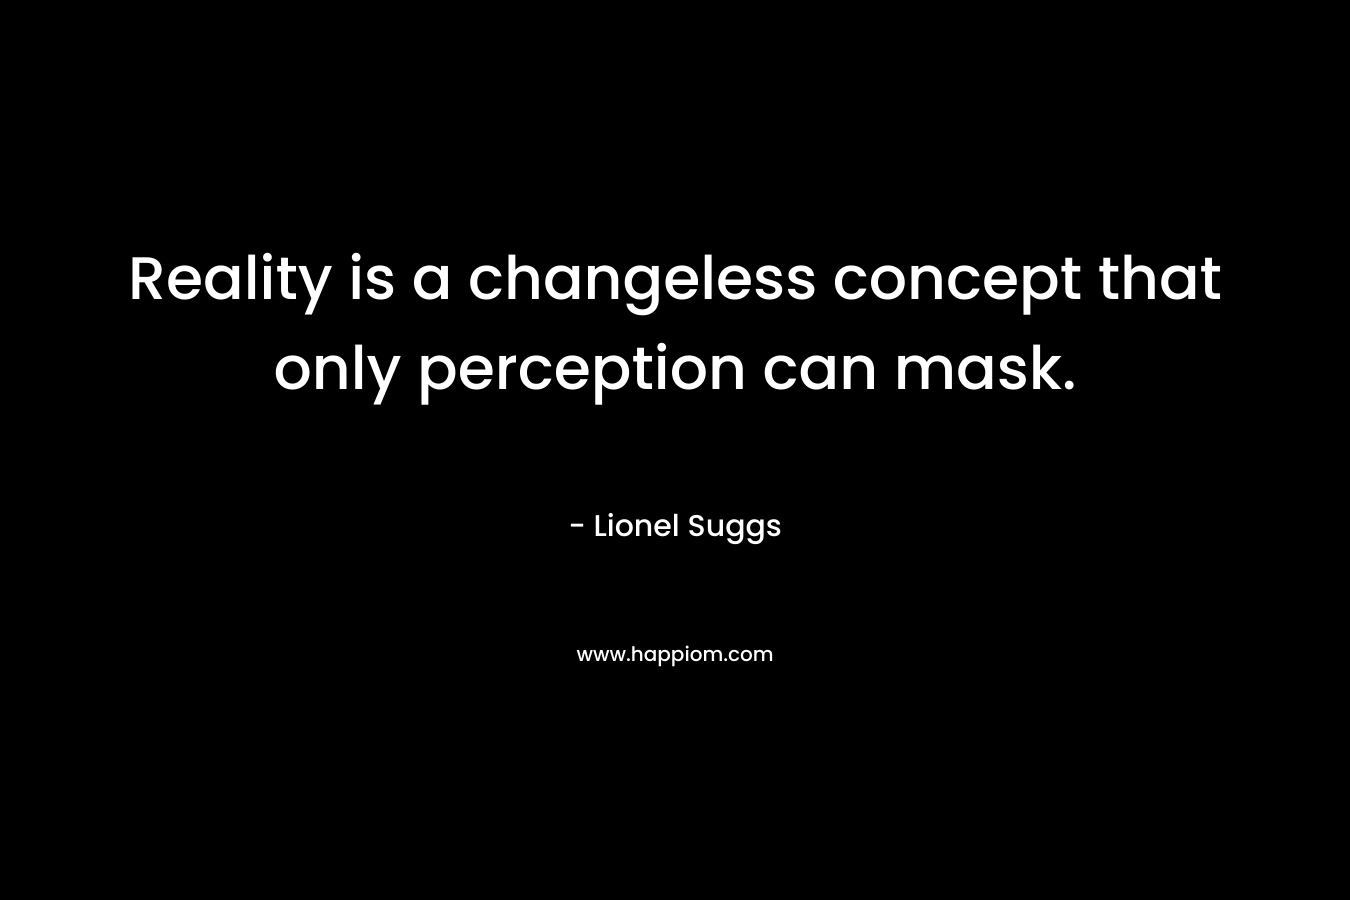 Reality is a changeless concept that only perception can mask. – Lionel Suggs